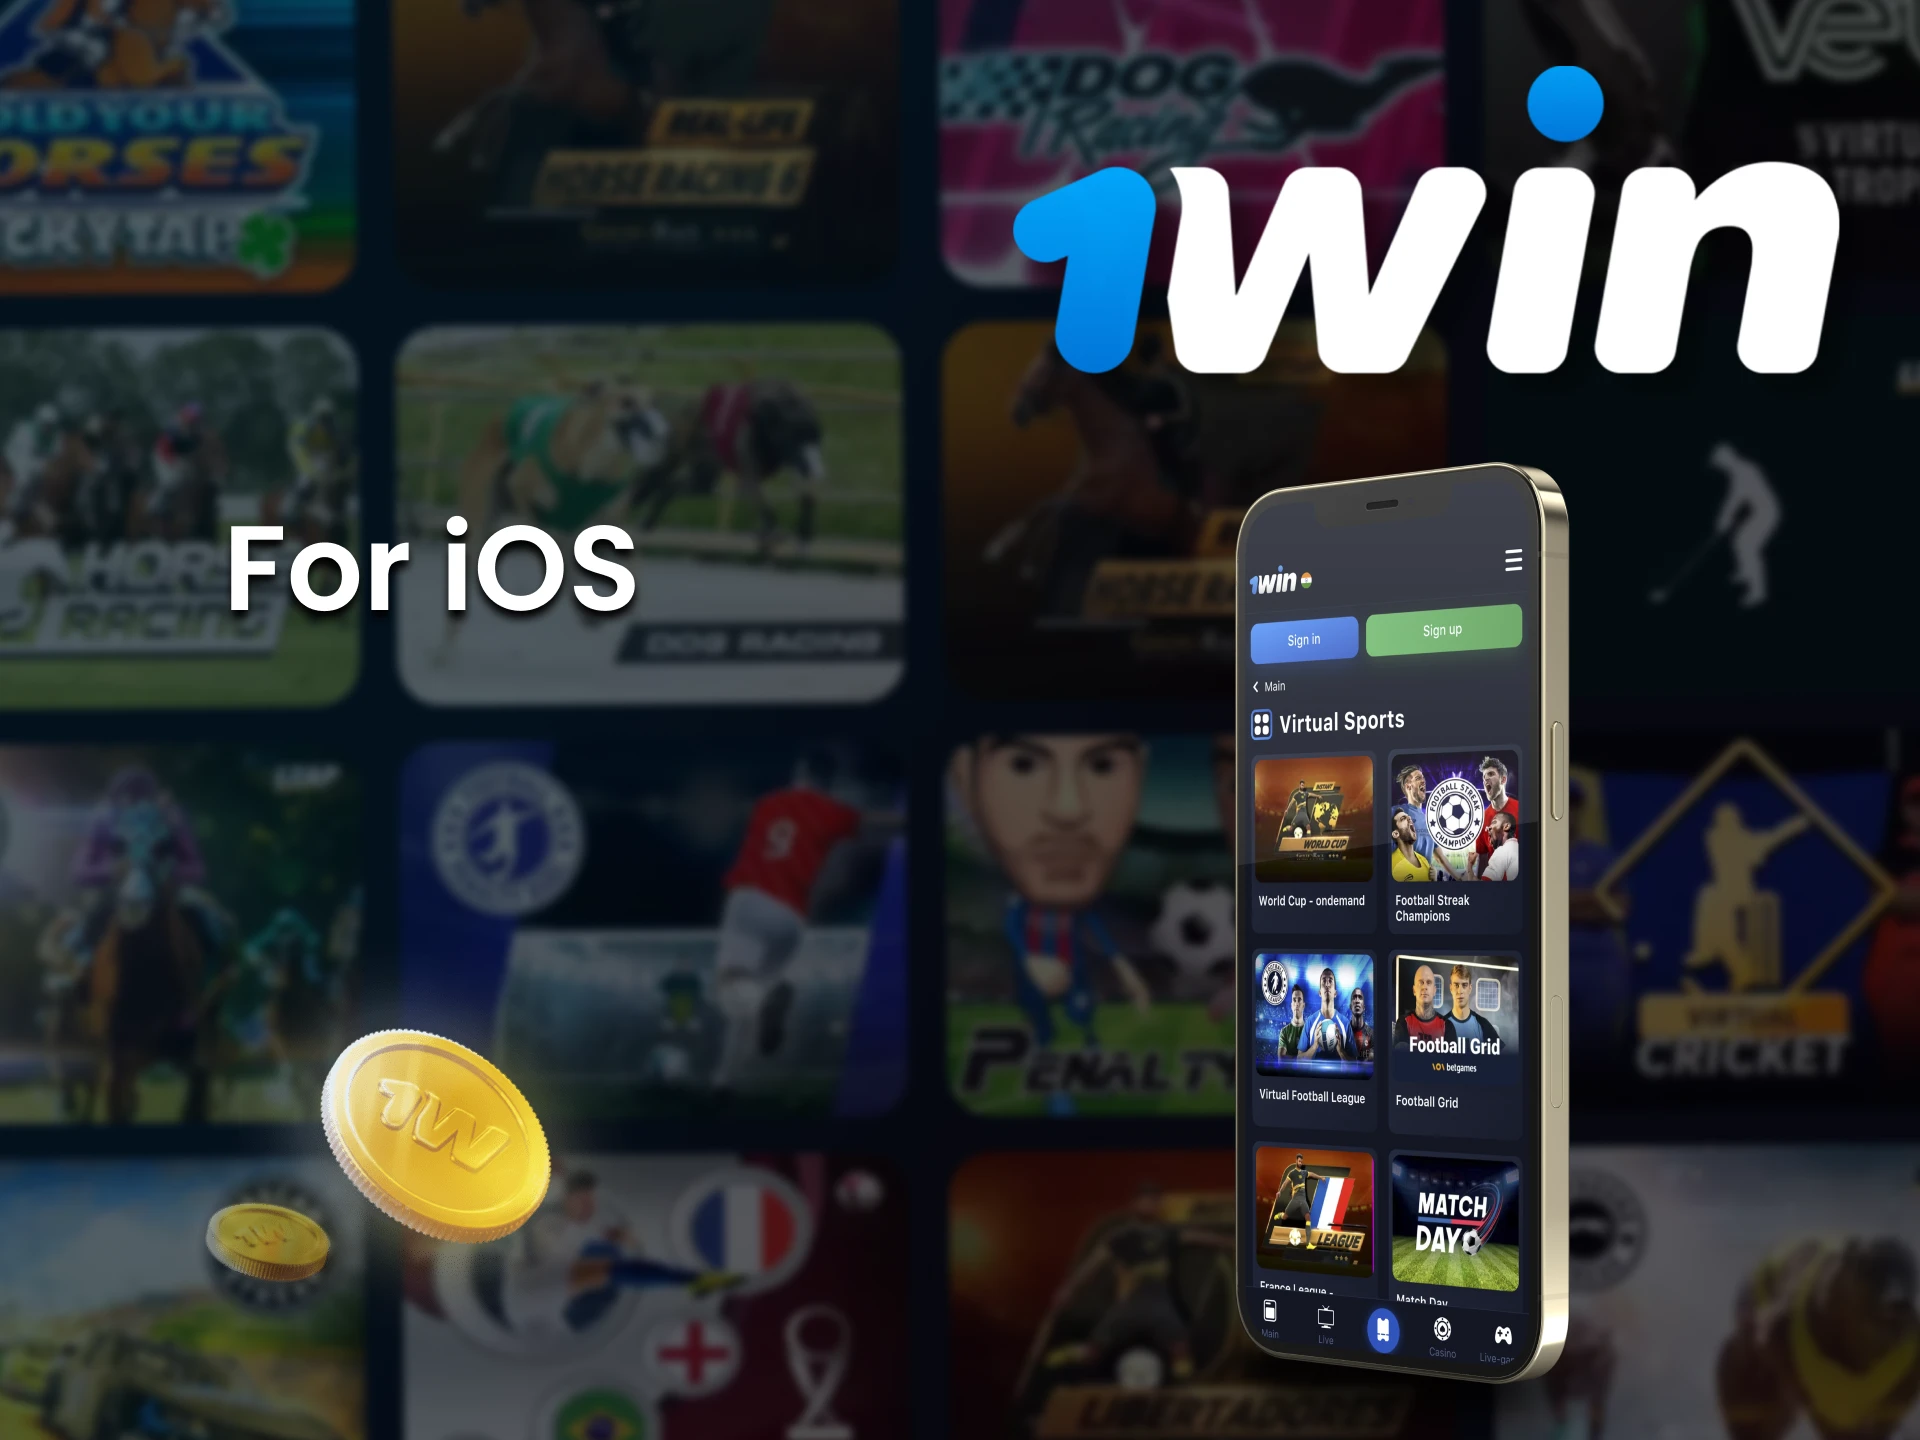 Download 1Win app for iOS to place bets on VSports.